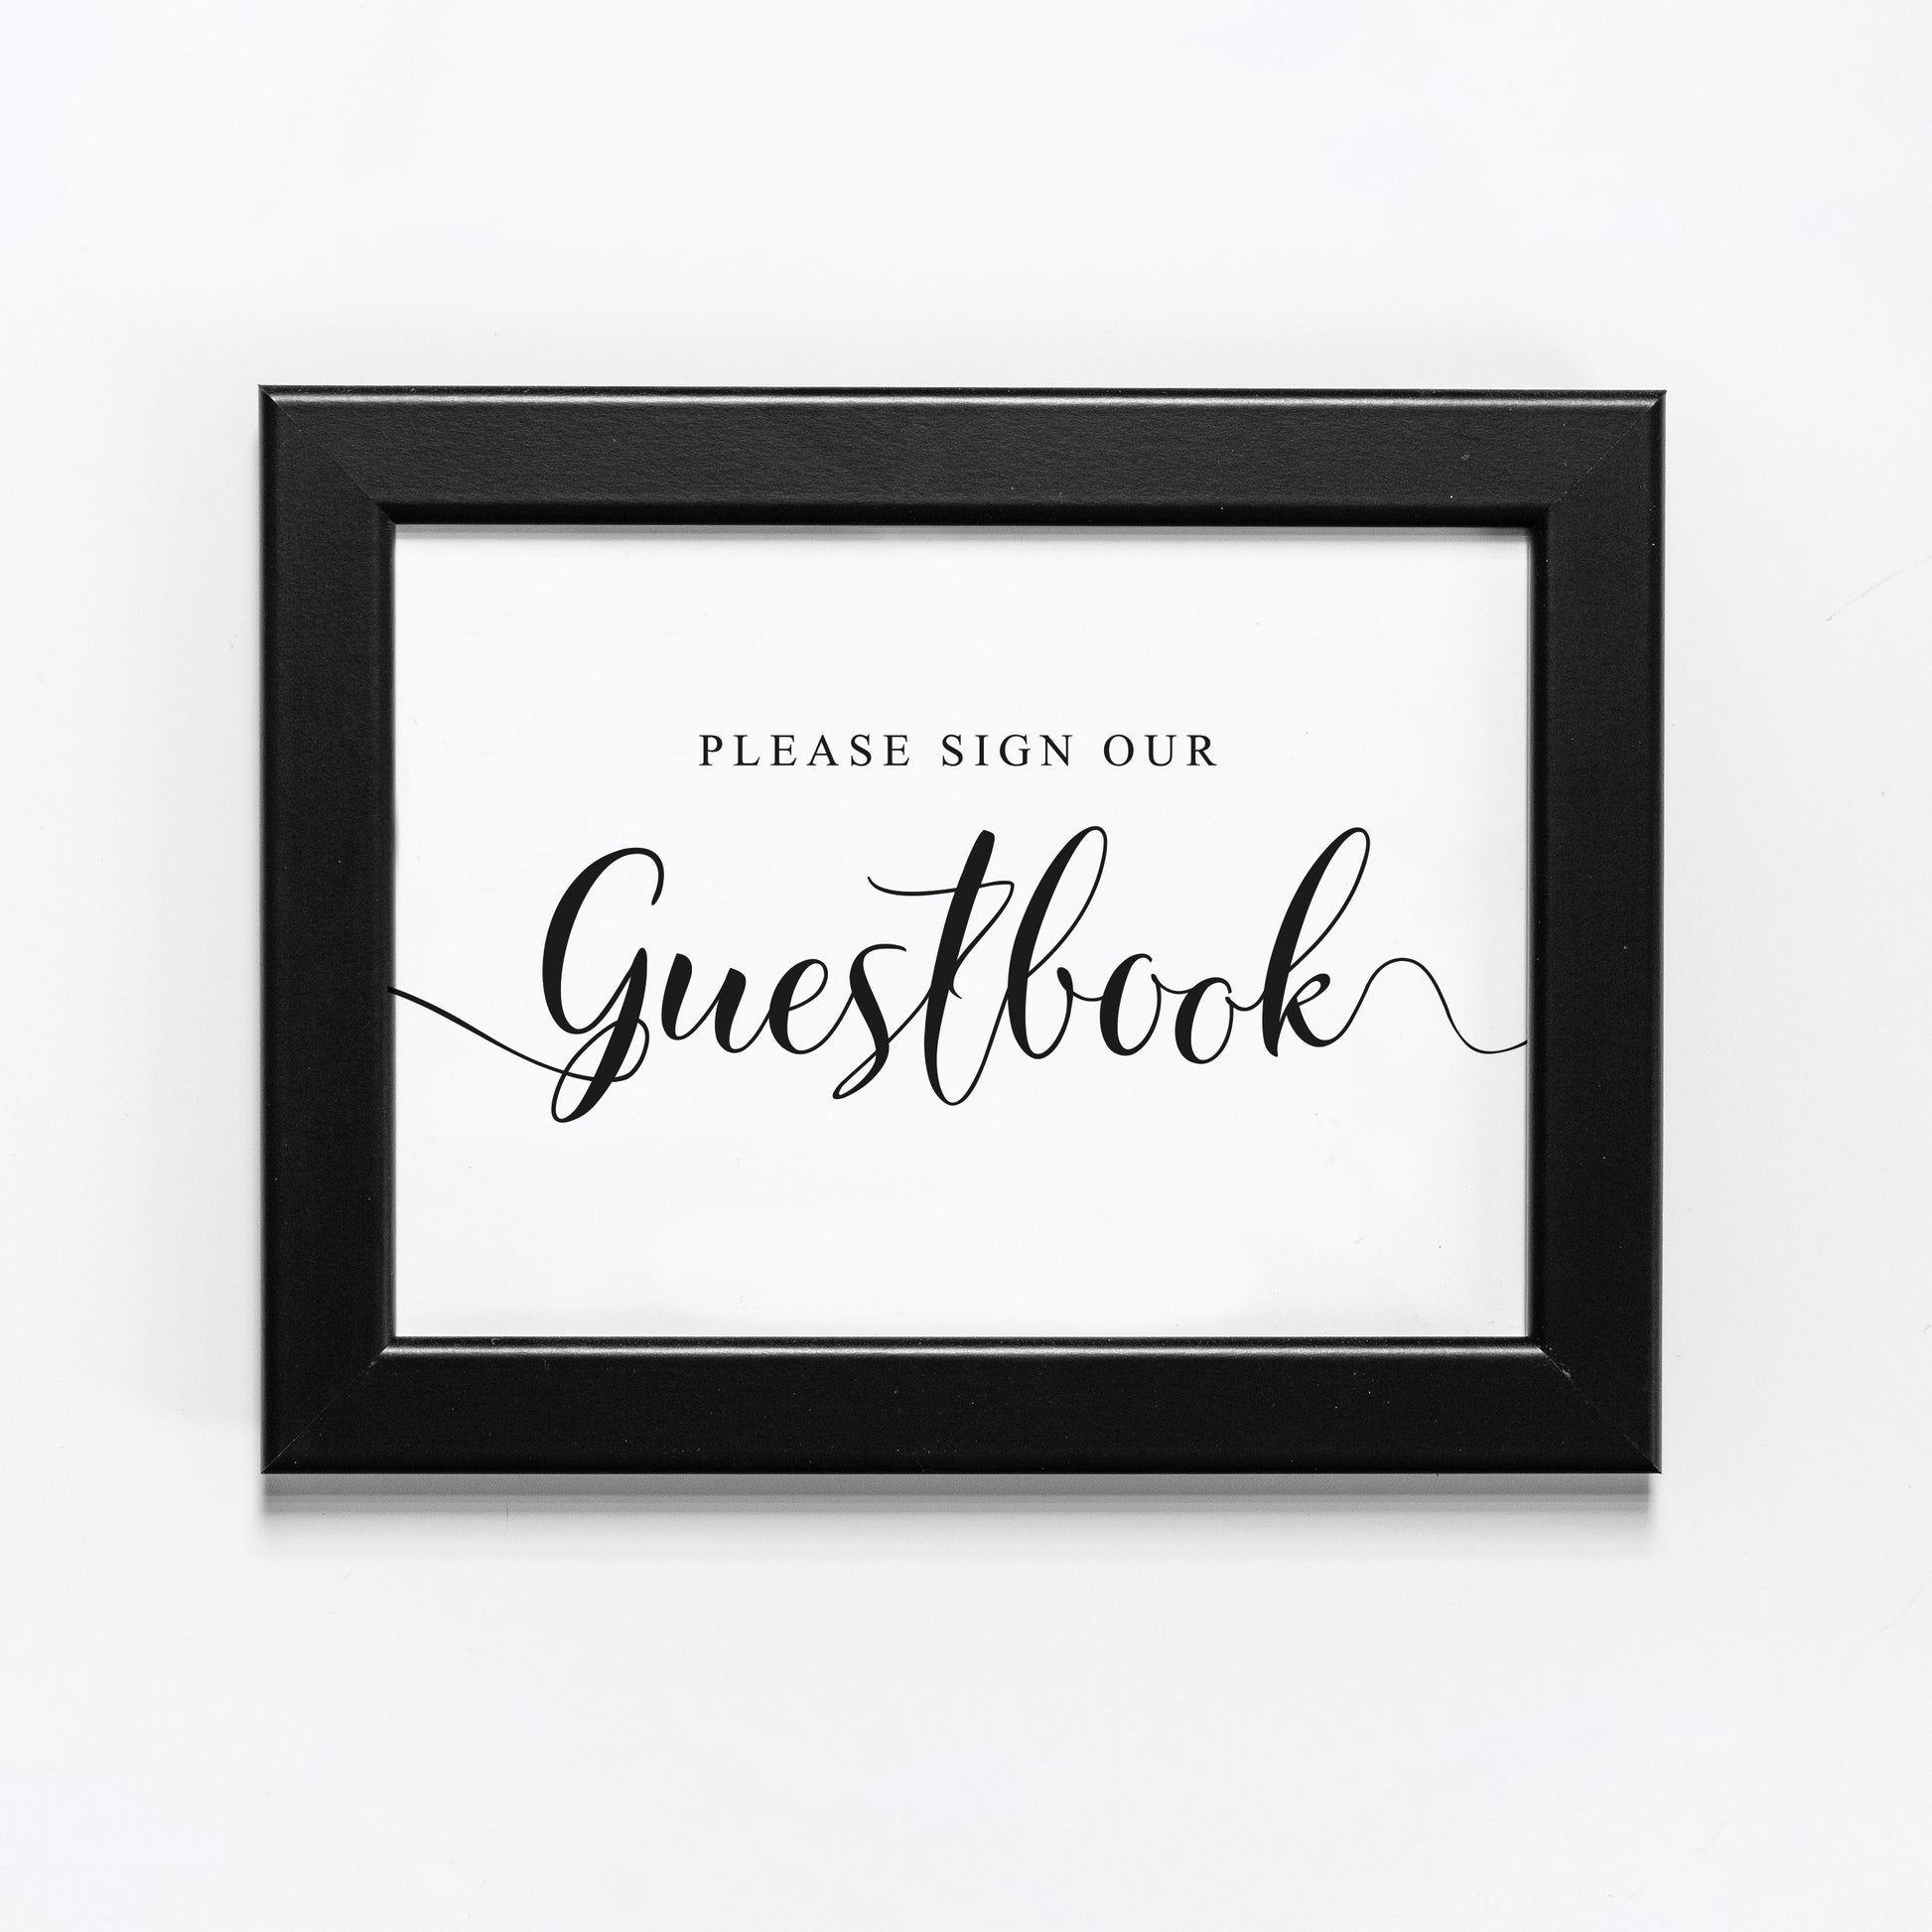 Wedding guest book sign in black A4 frame